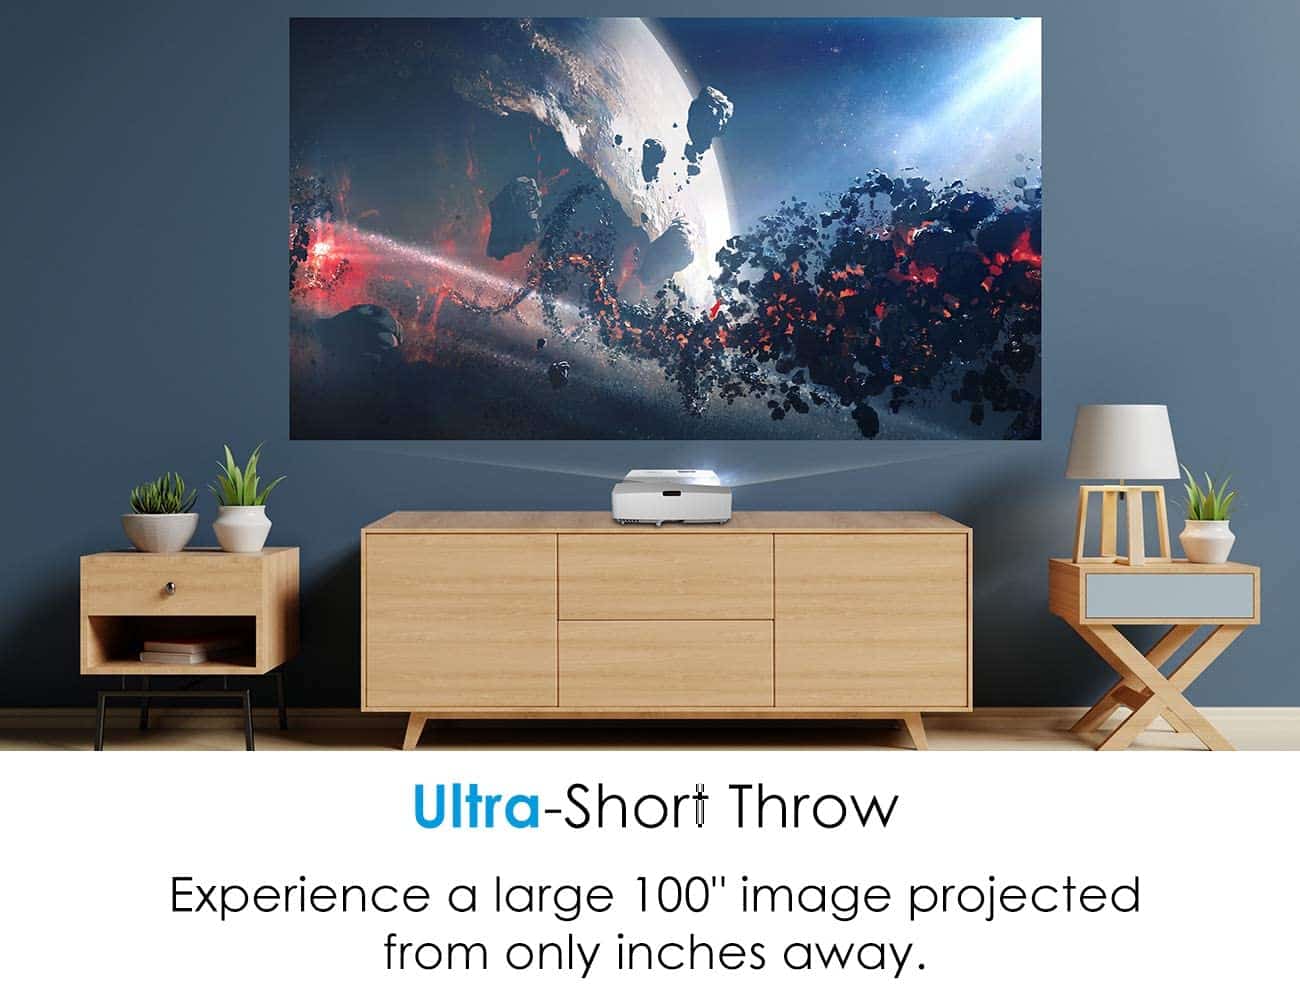 Best Ultra Short Throw Projector 4K 7 Top Choices for 2022